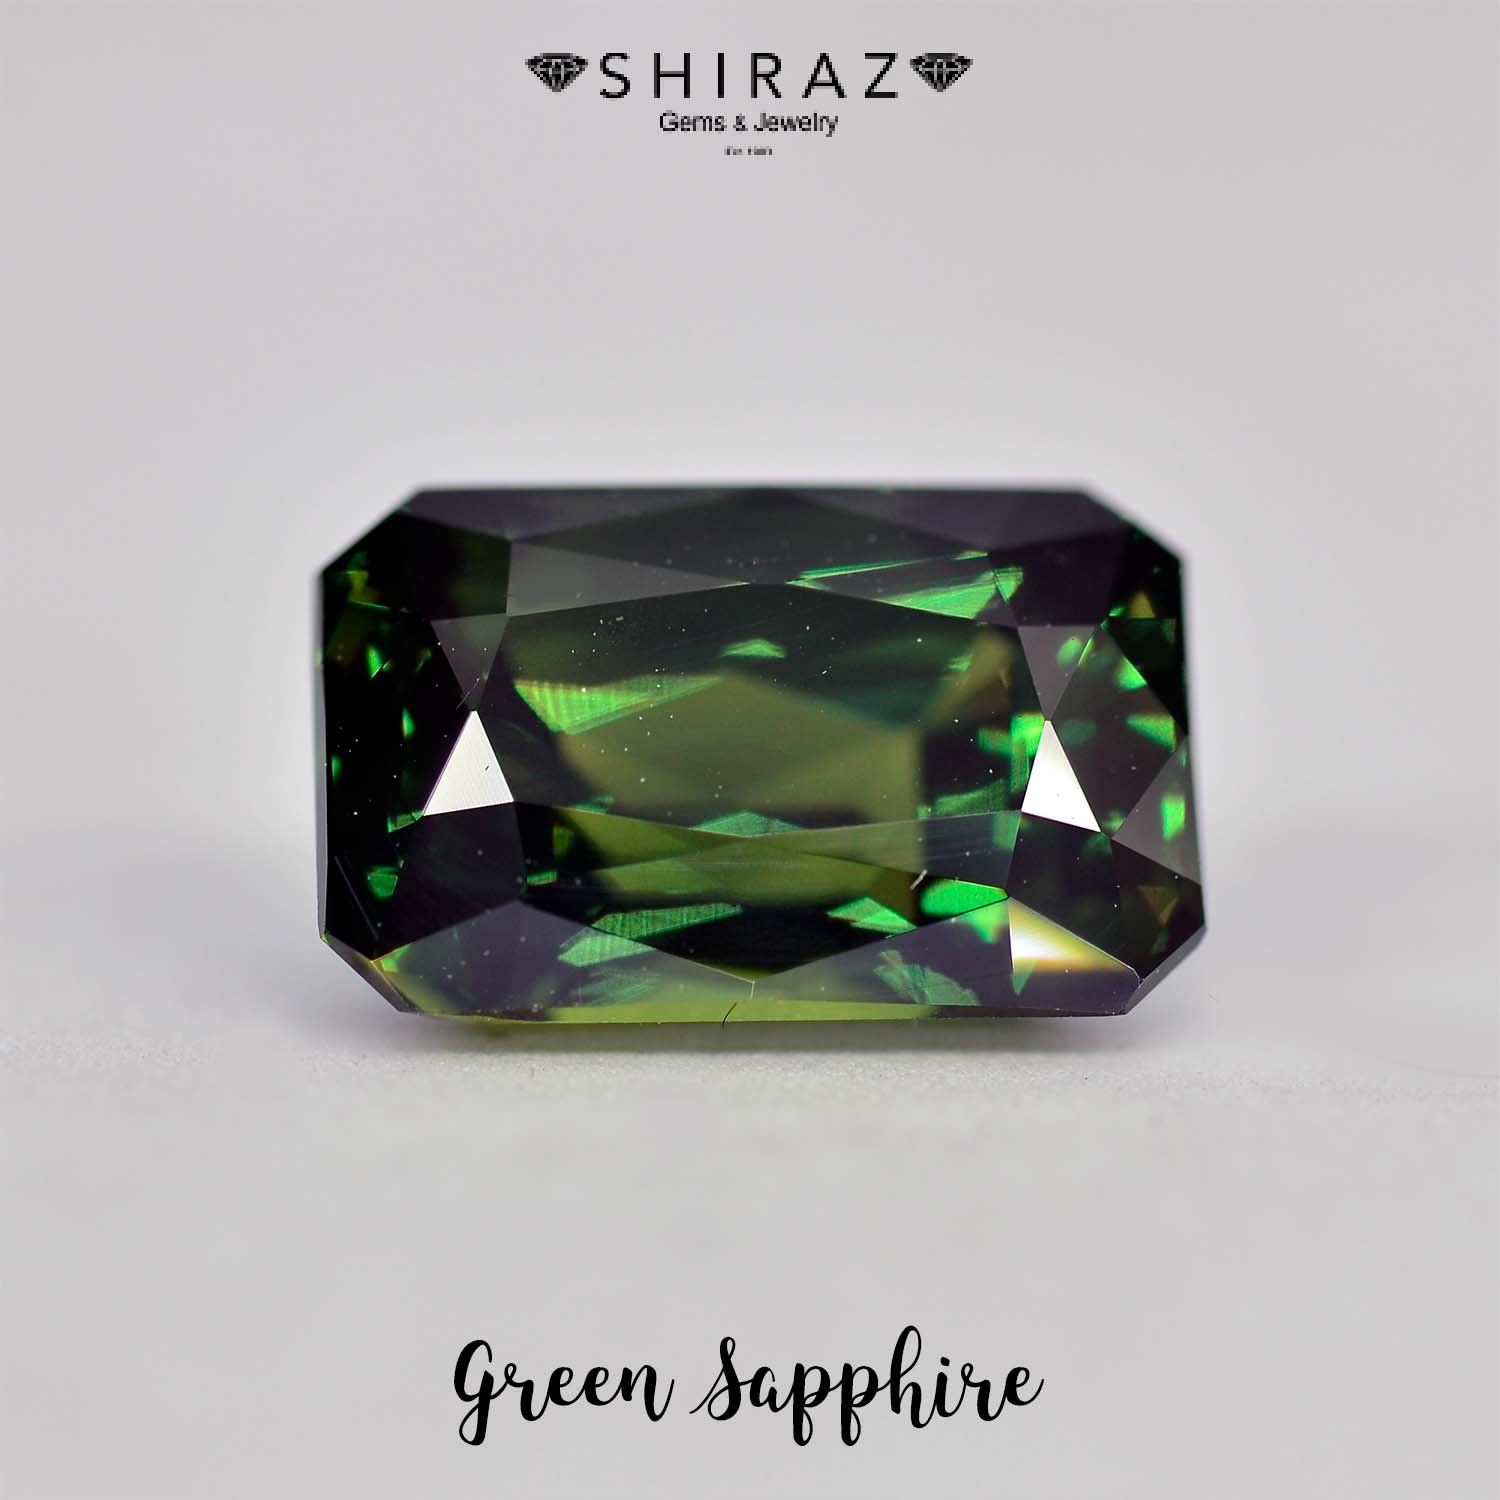 2023 Engagement Ring Trends: Here’s Why Green Sapphire is Suitable